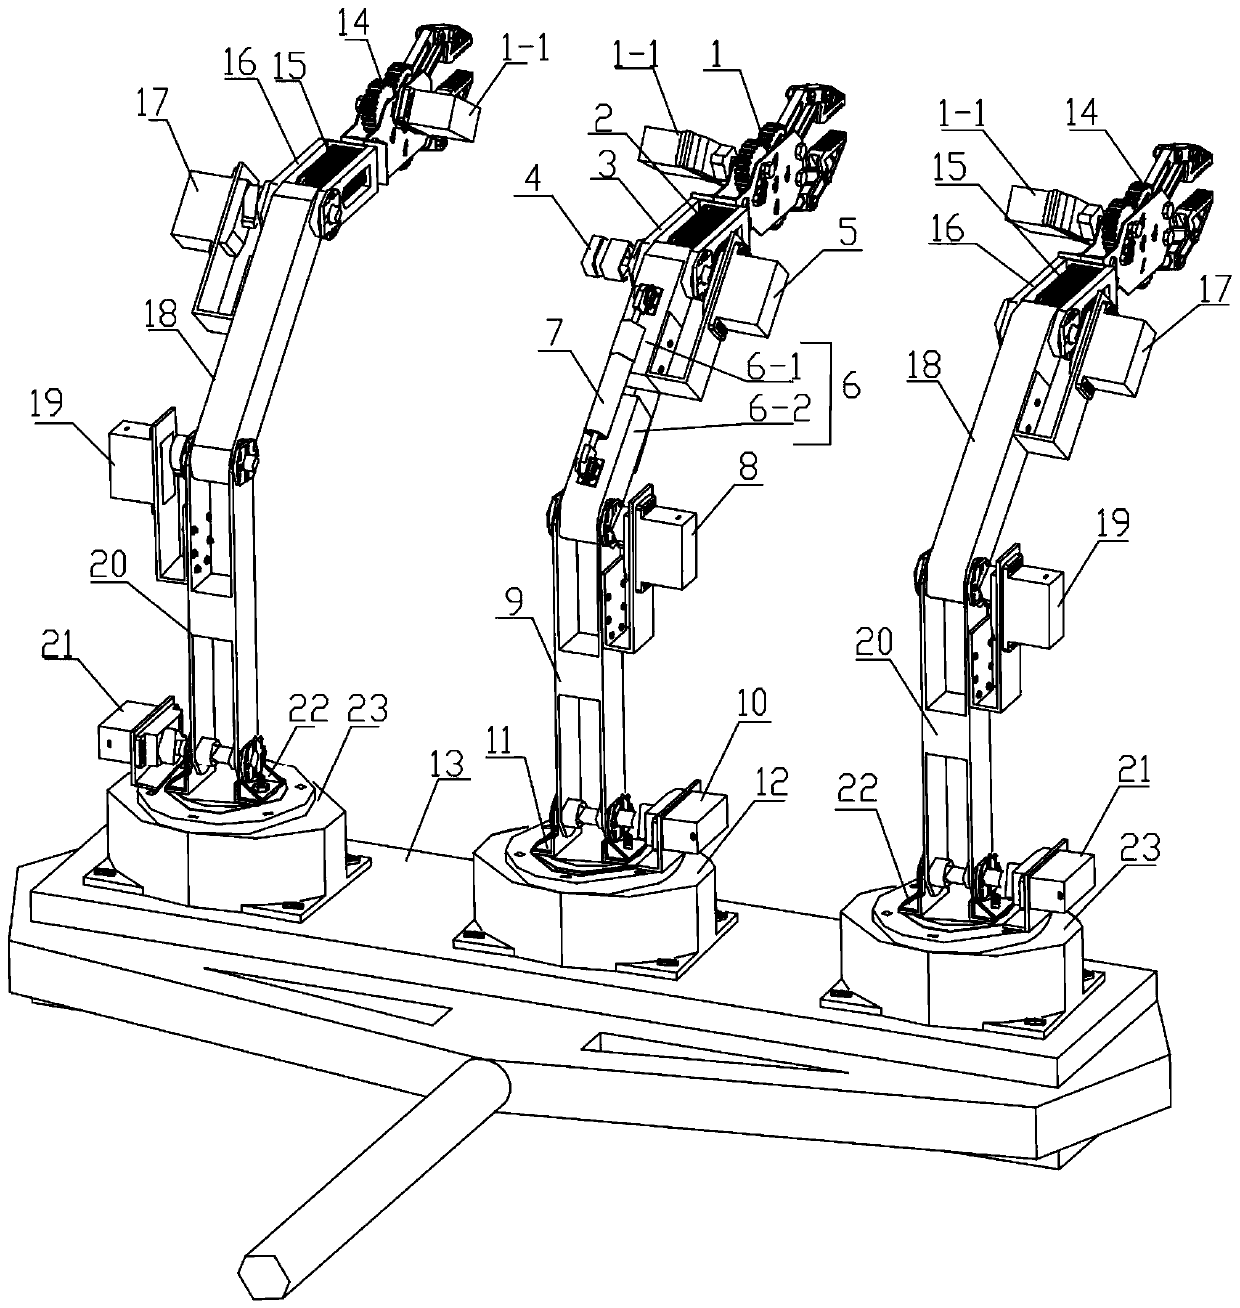 Three-point clamping-type vibration picking device